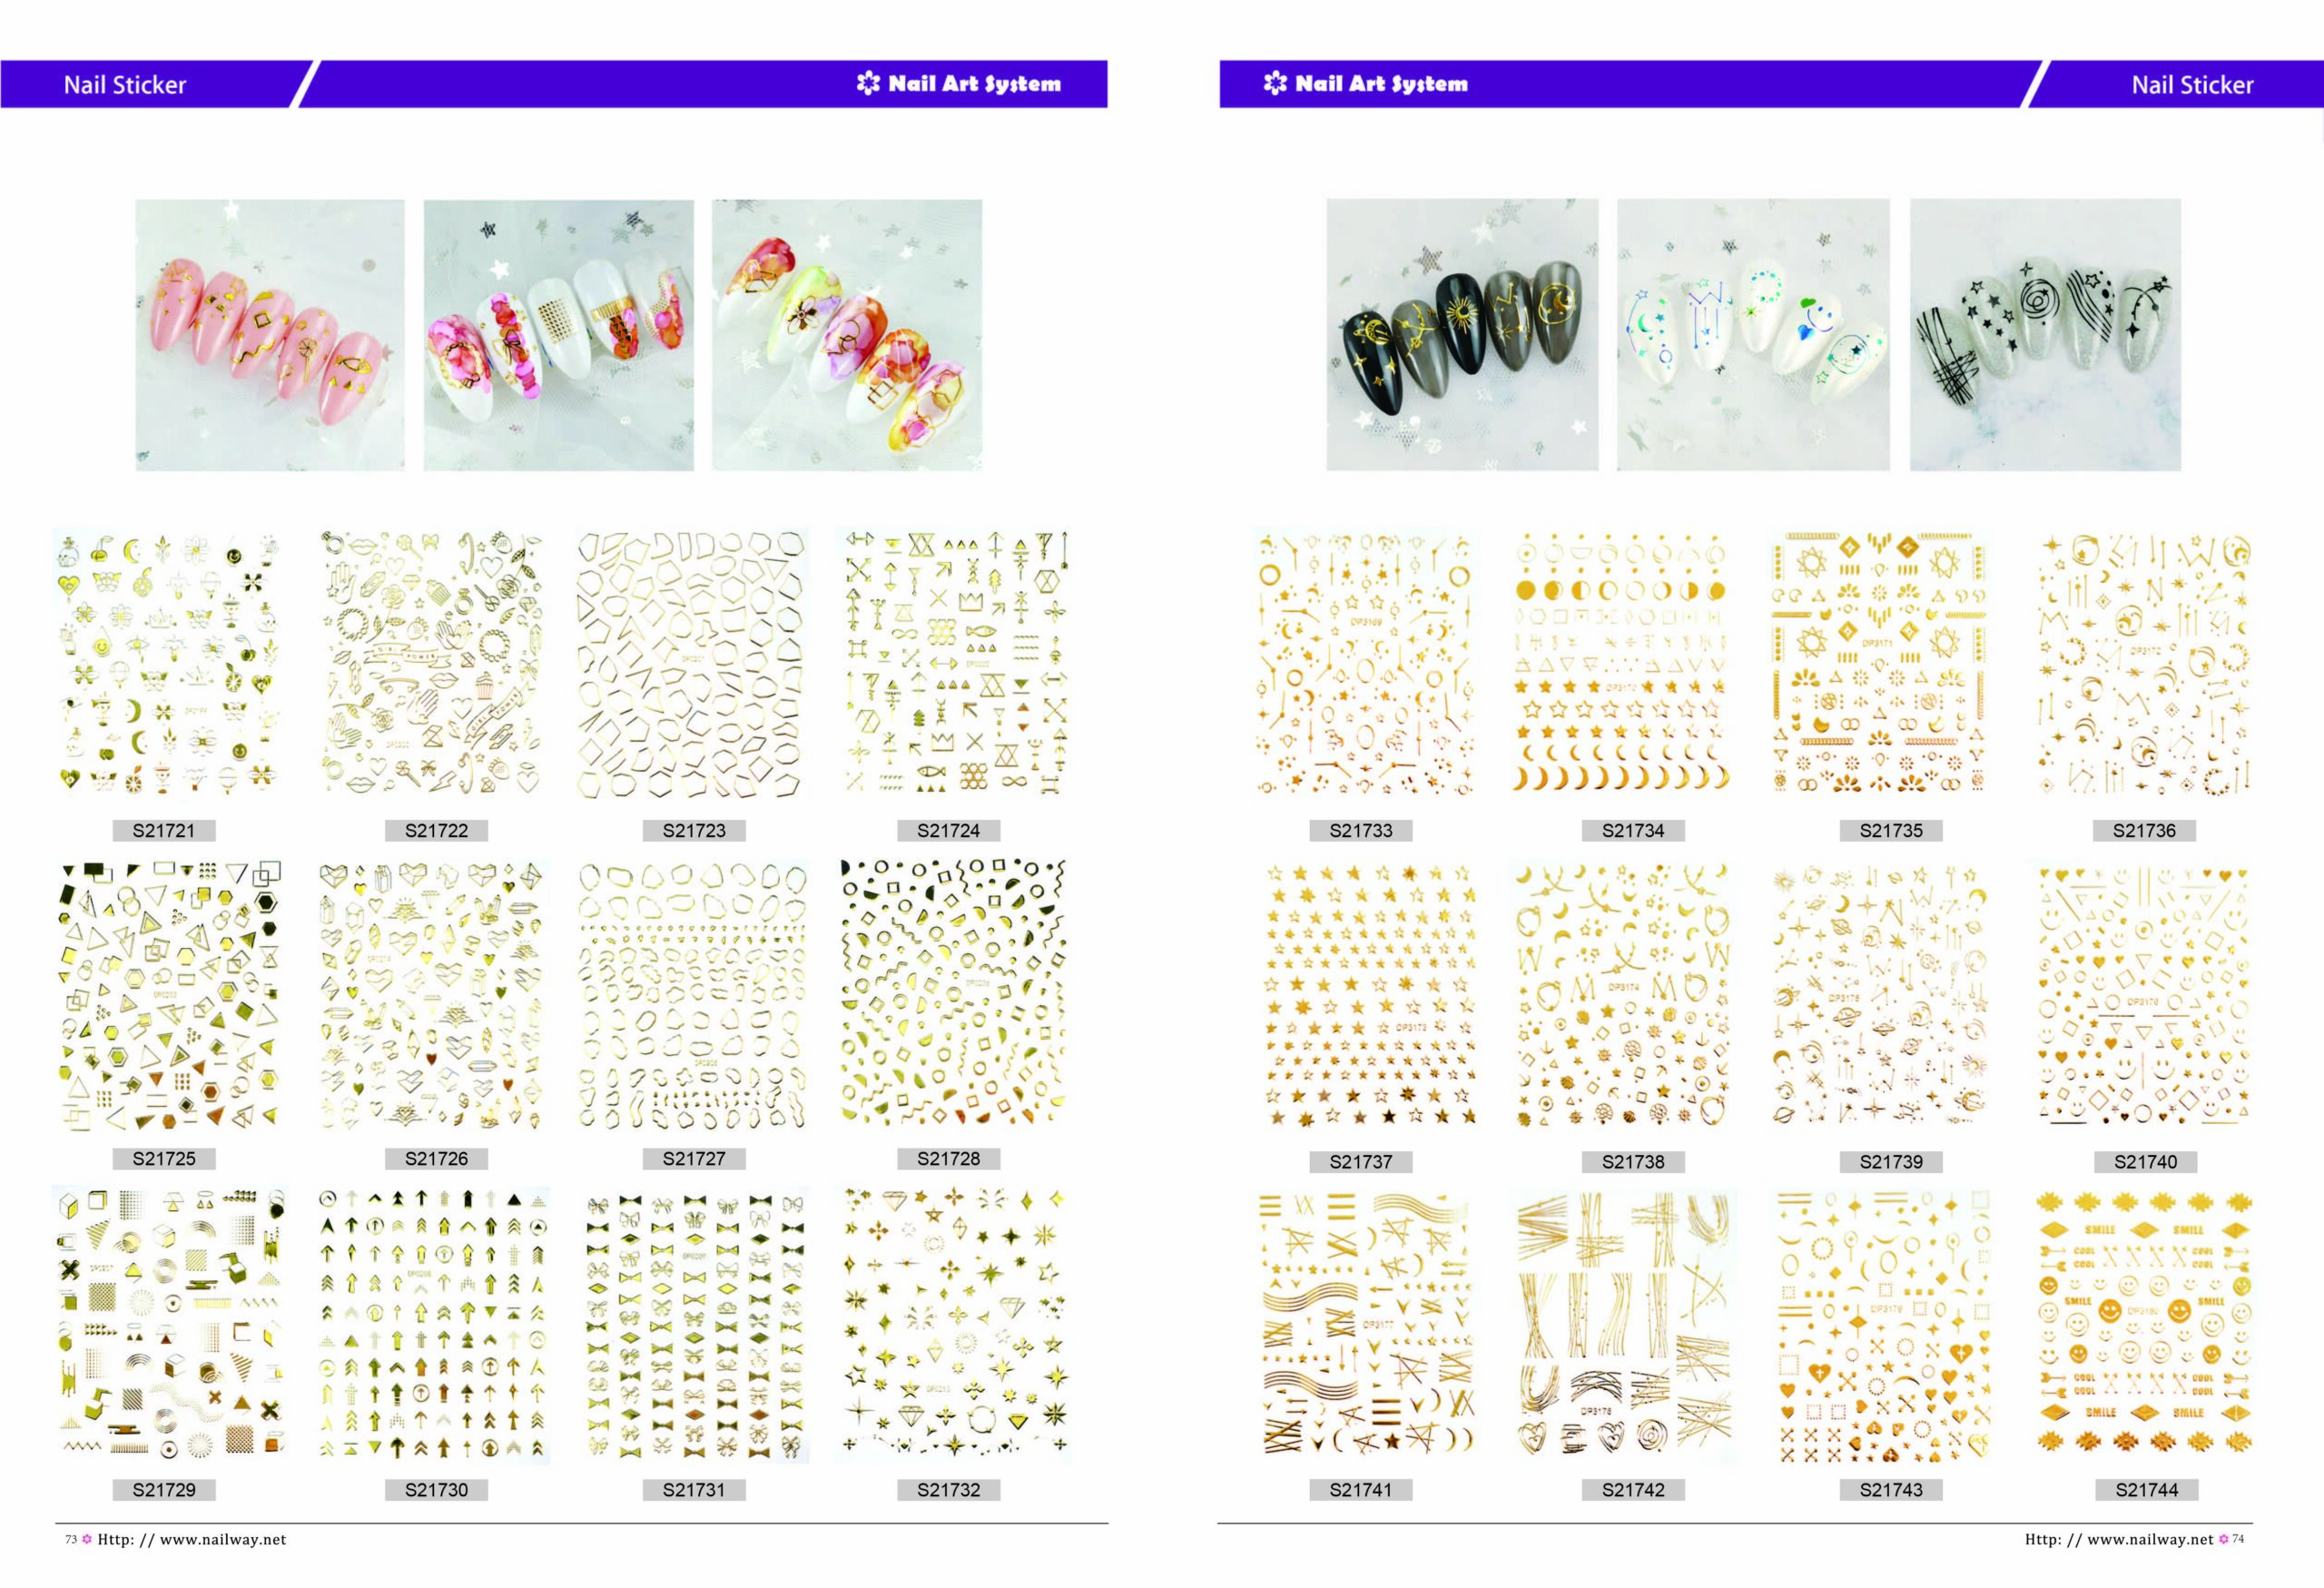 nail stickerS217 (1)